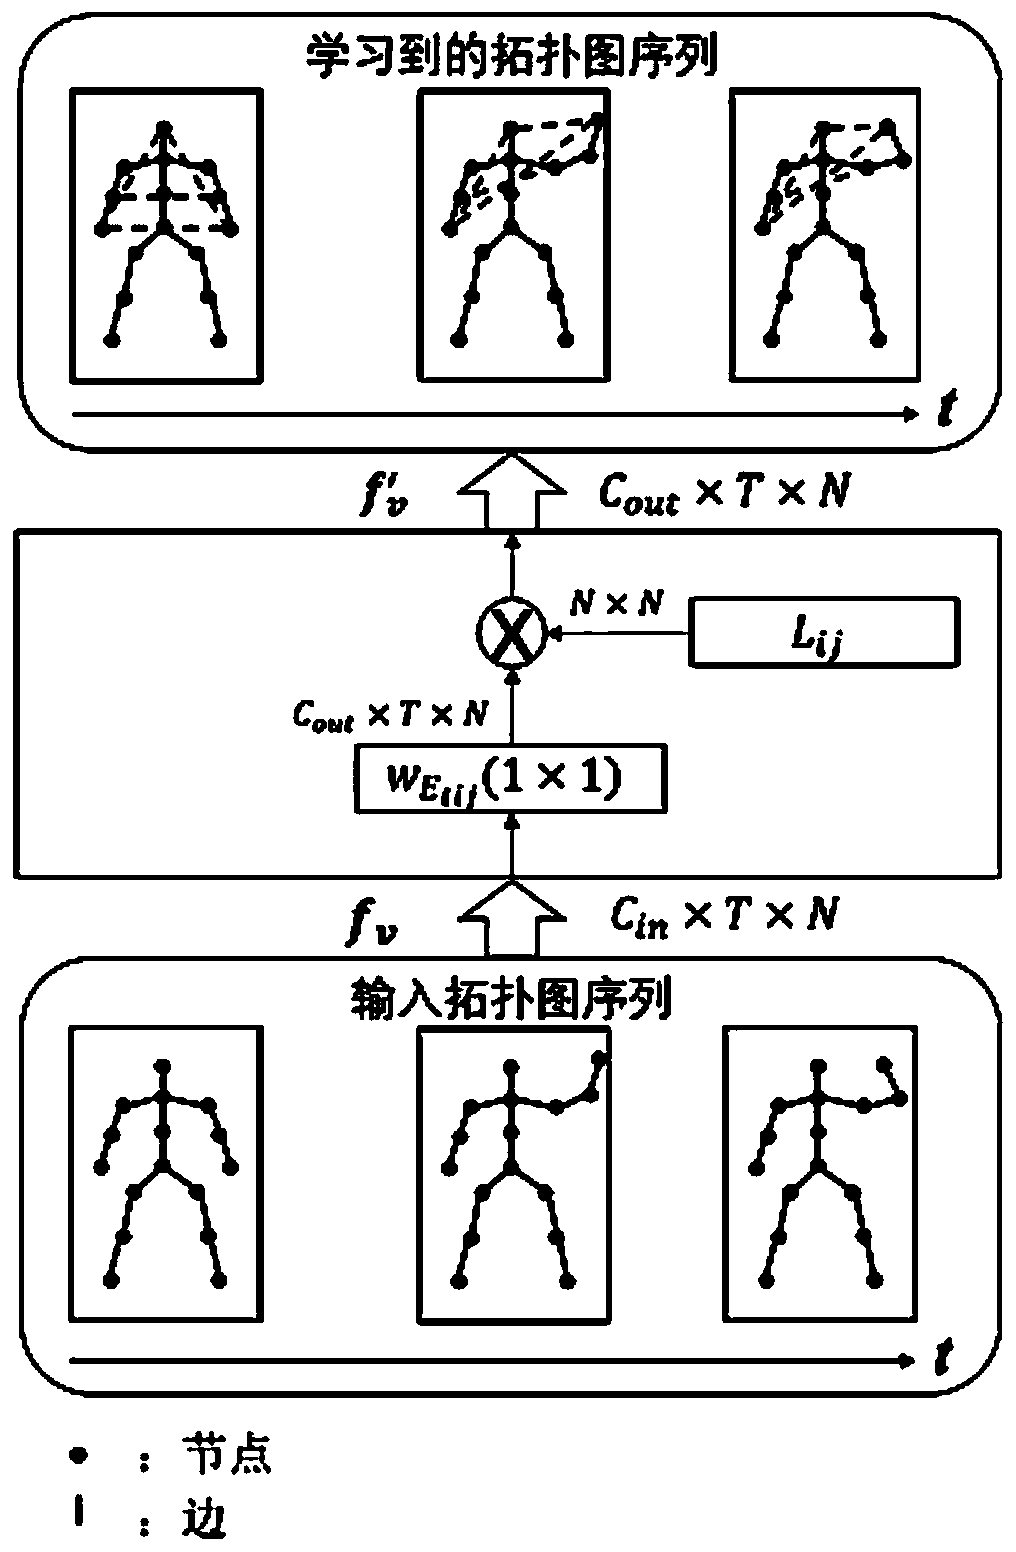 Human body behavior recognition method and system based on graph convolution network